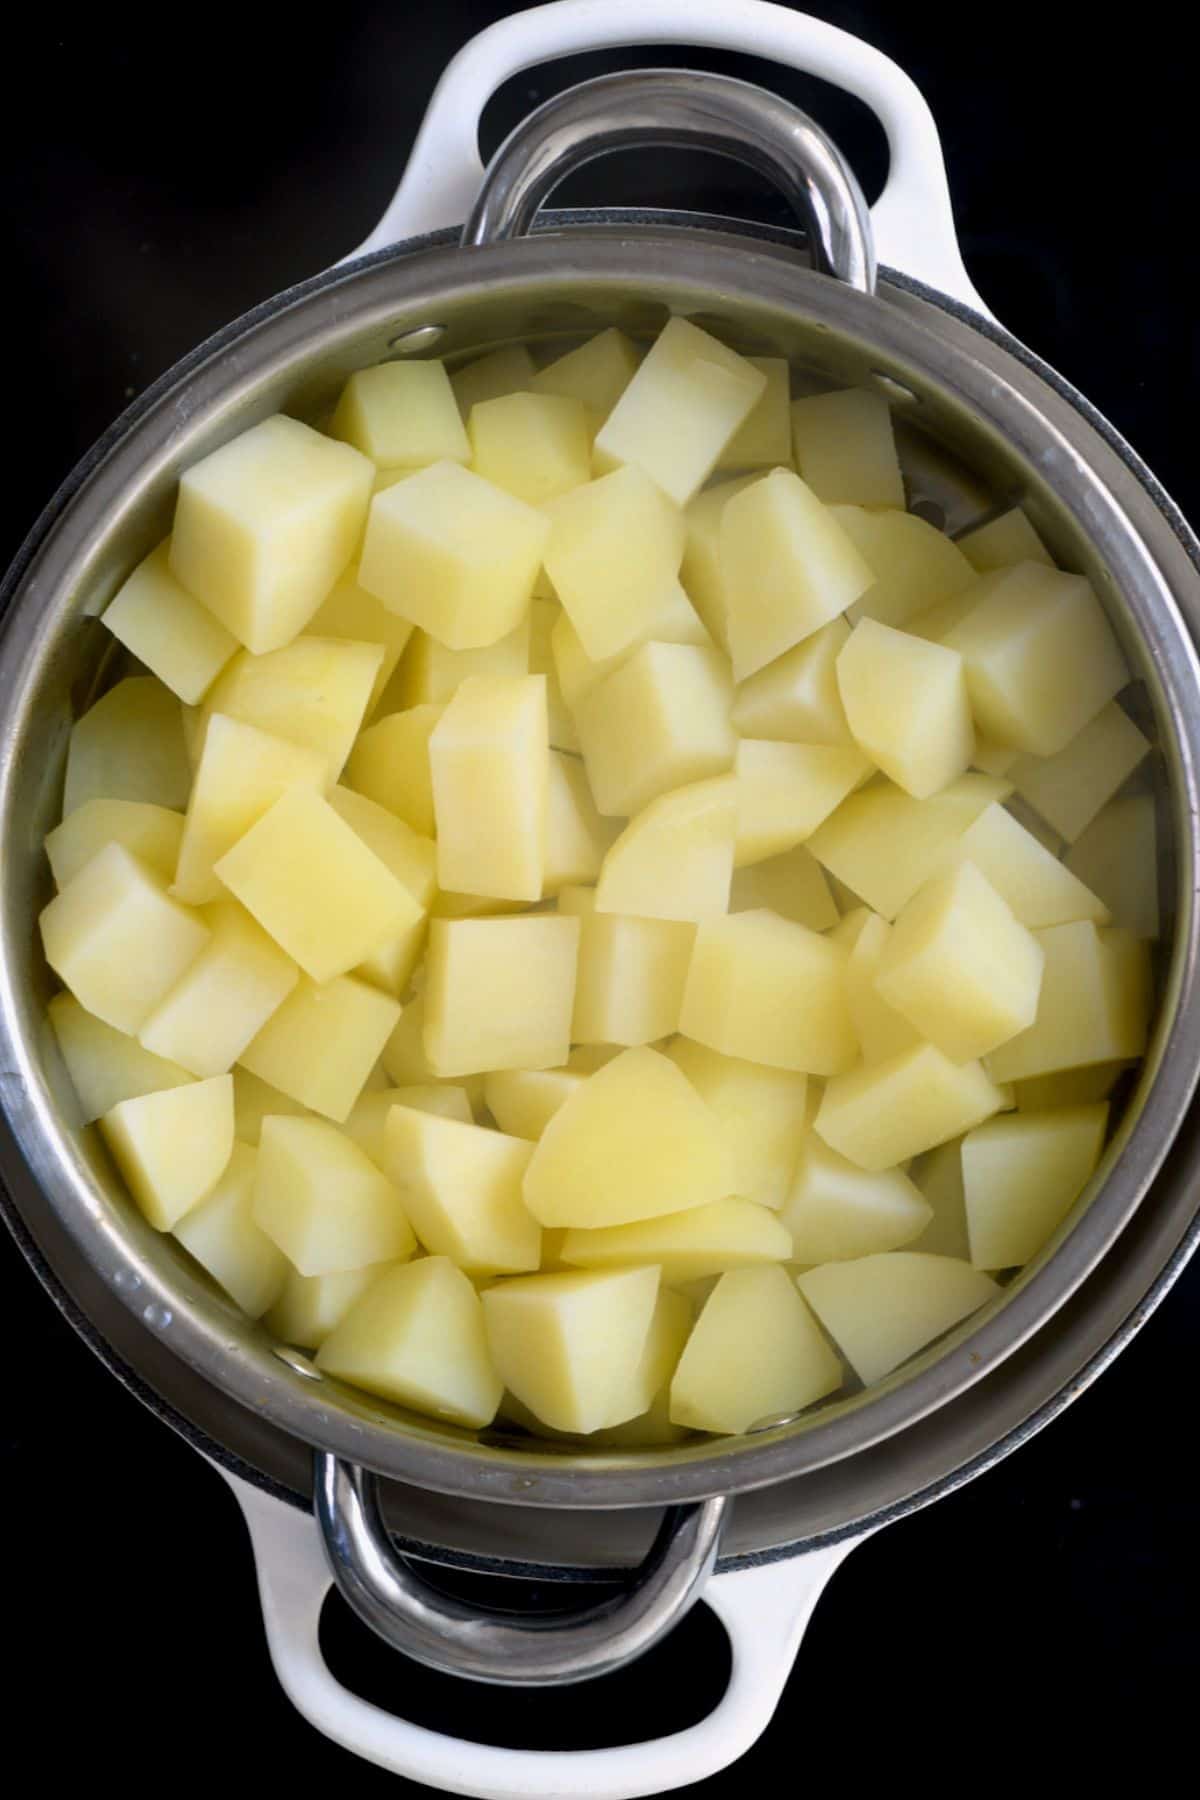 Cubed boiled potatoes in a colander